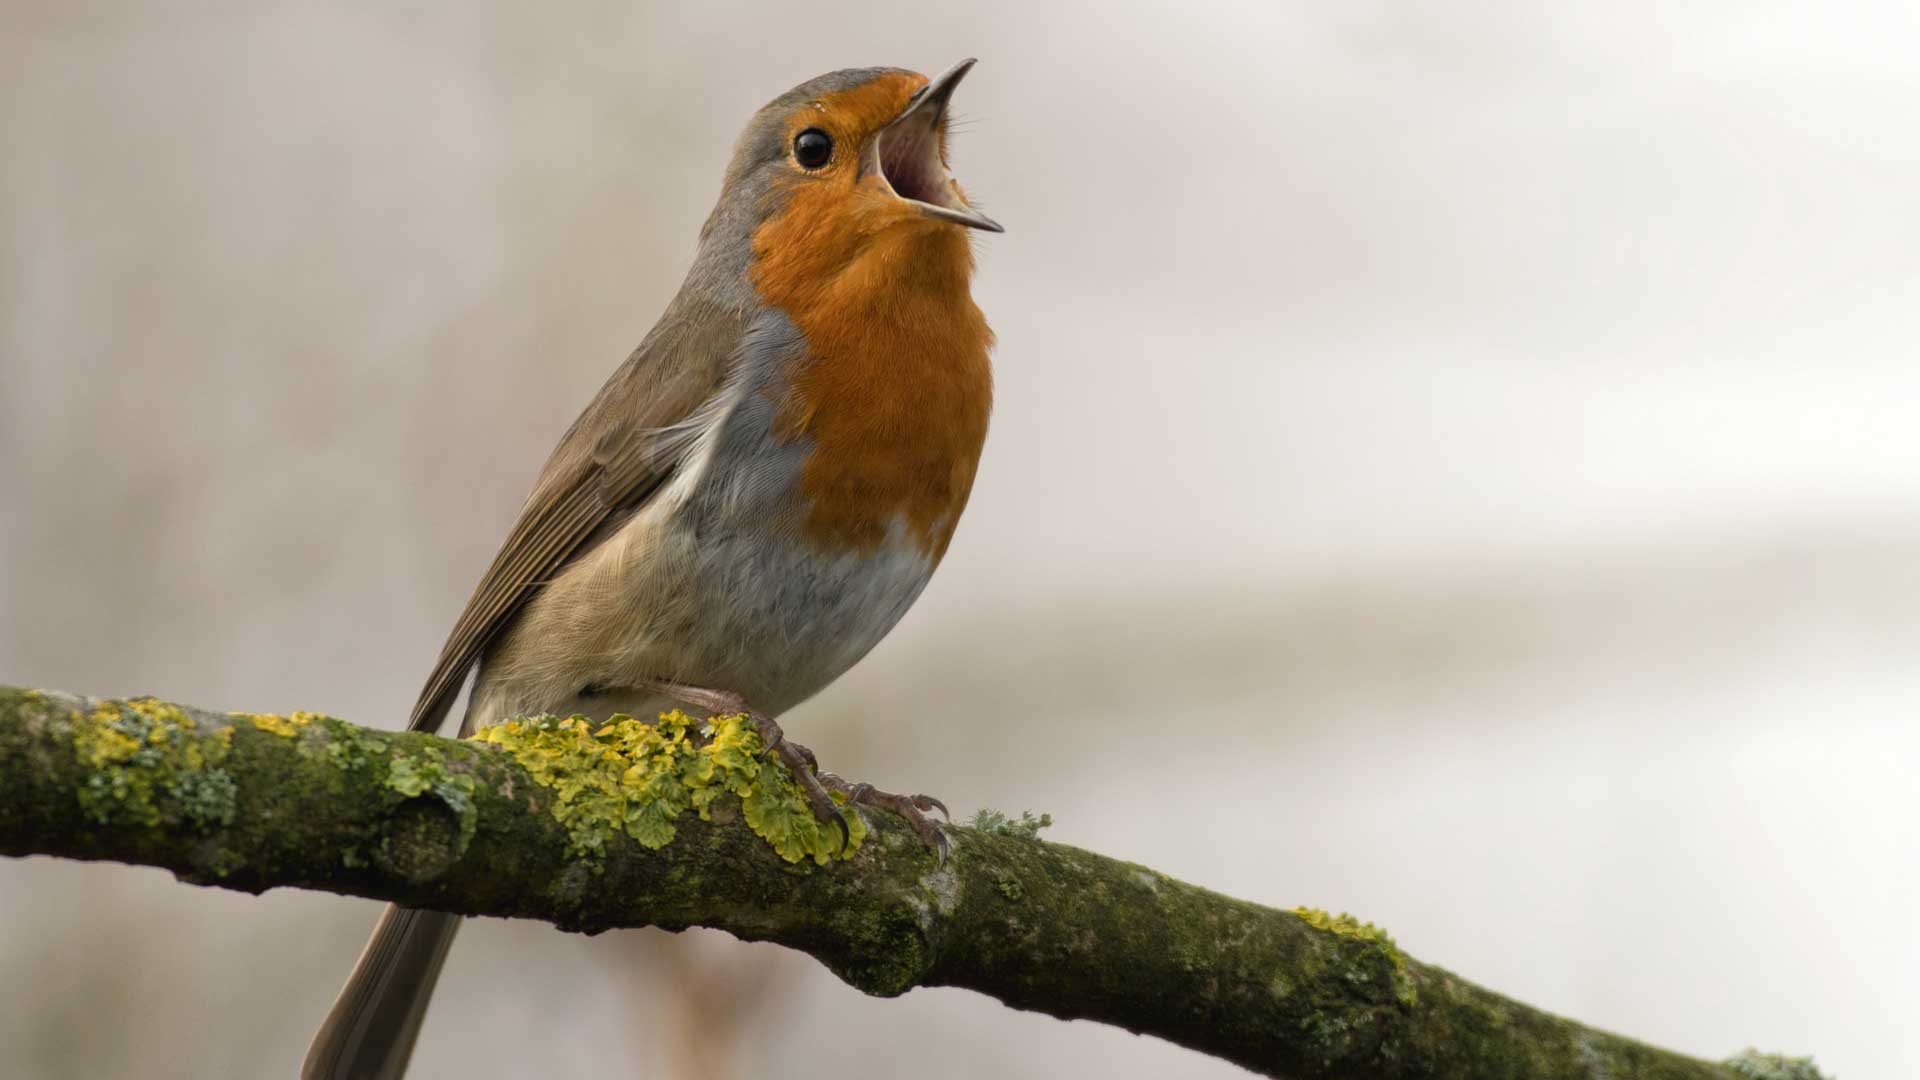 A small orange robin chirps on the branch of a tree.